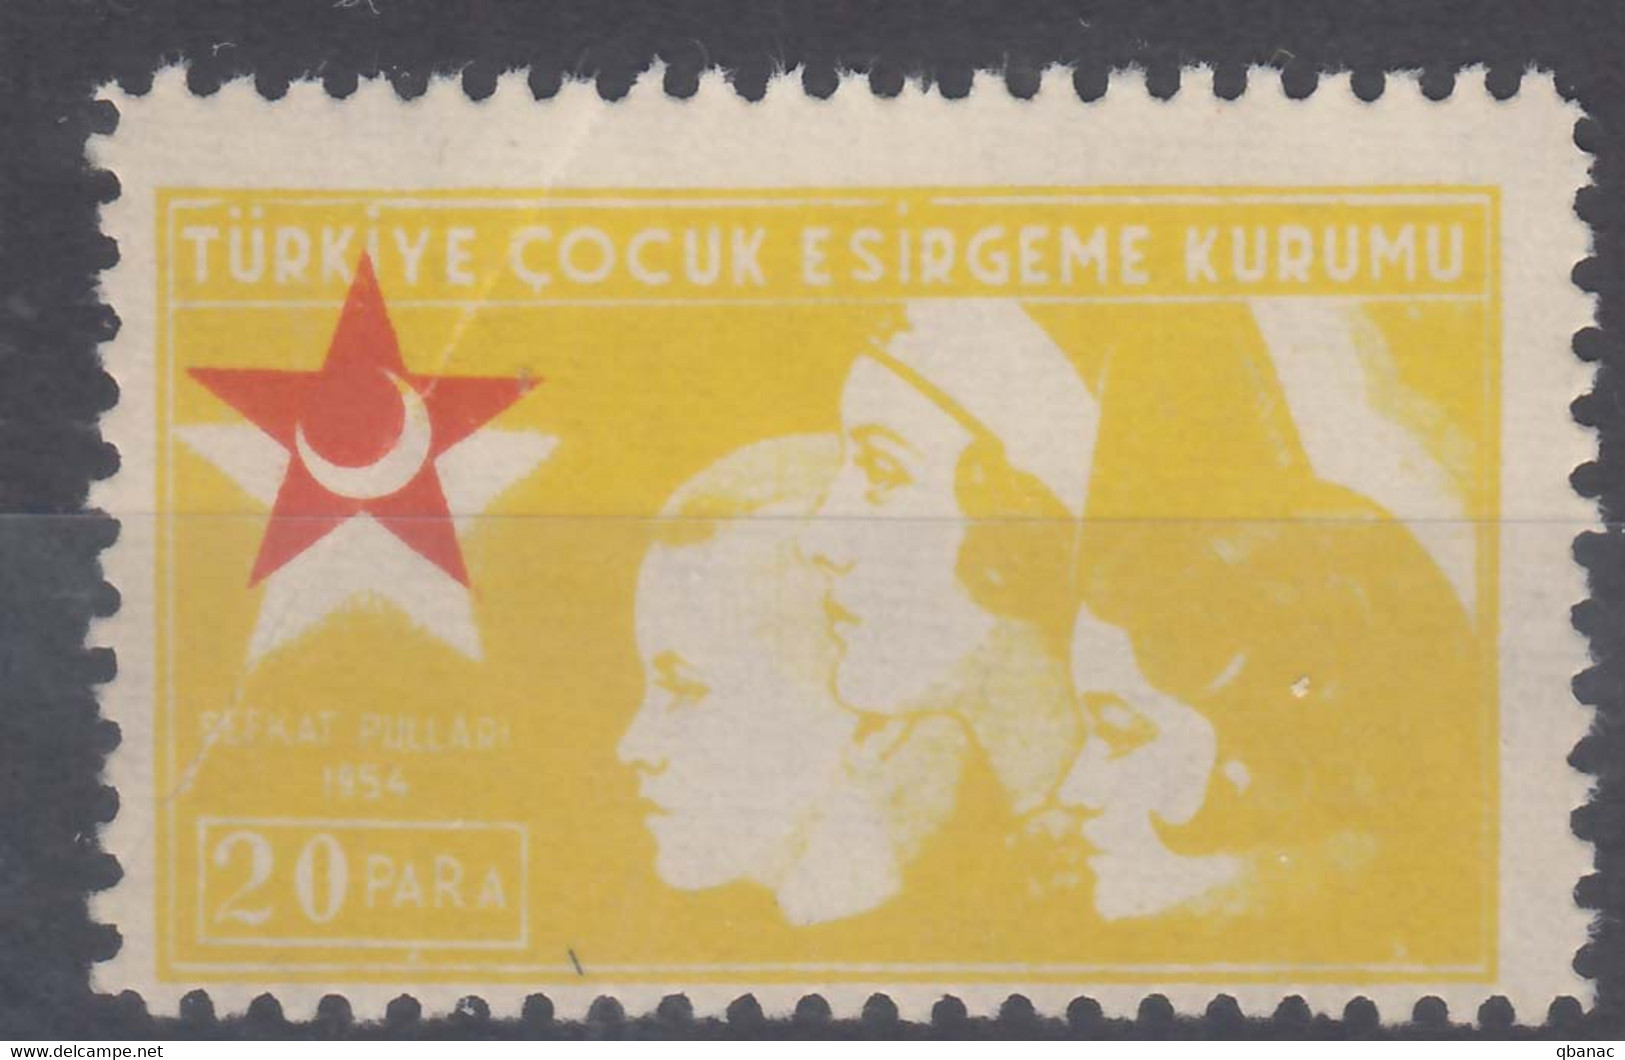 Turkey Back Of Book Charity Stamps 1954, Mint Hinged, Error - Moved Star - Charity Stamps